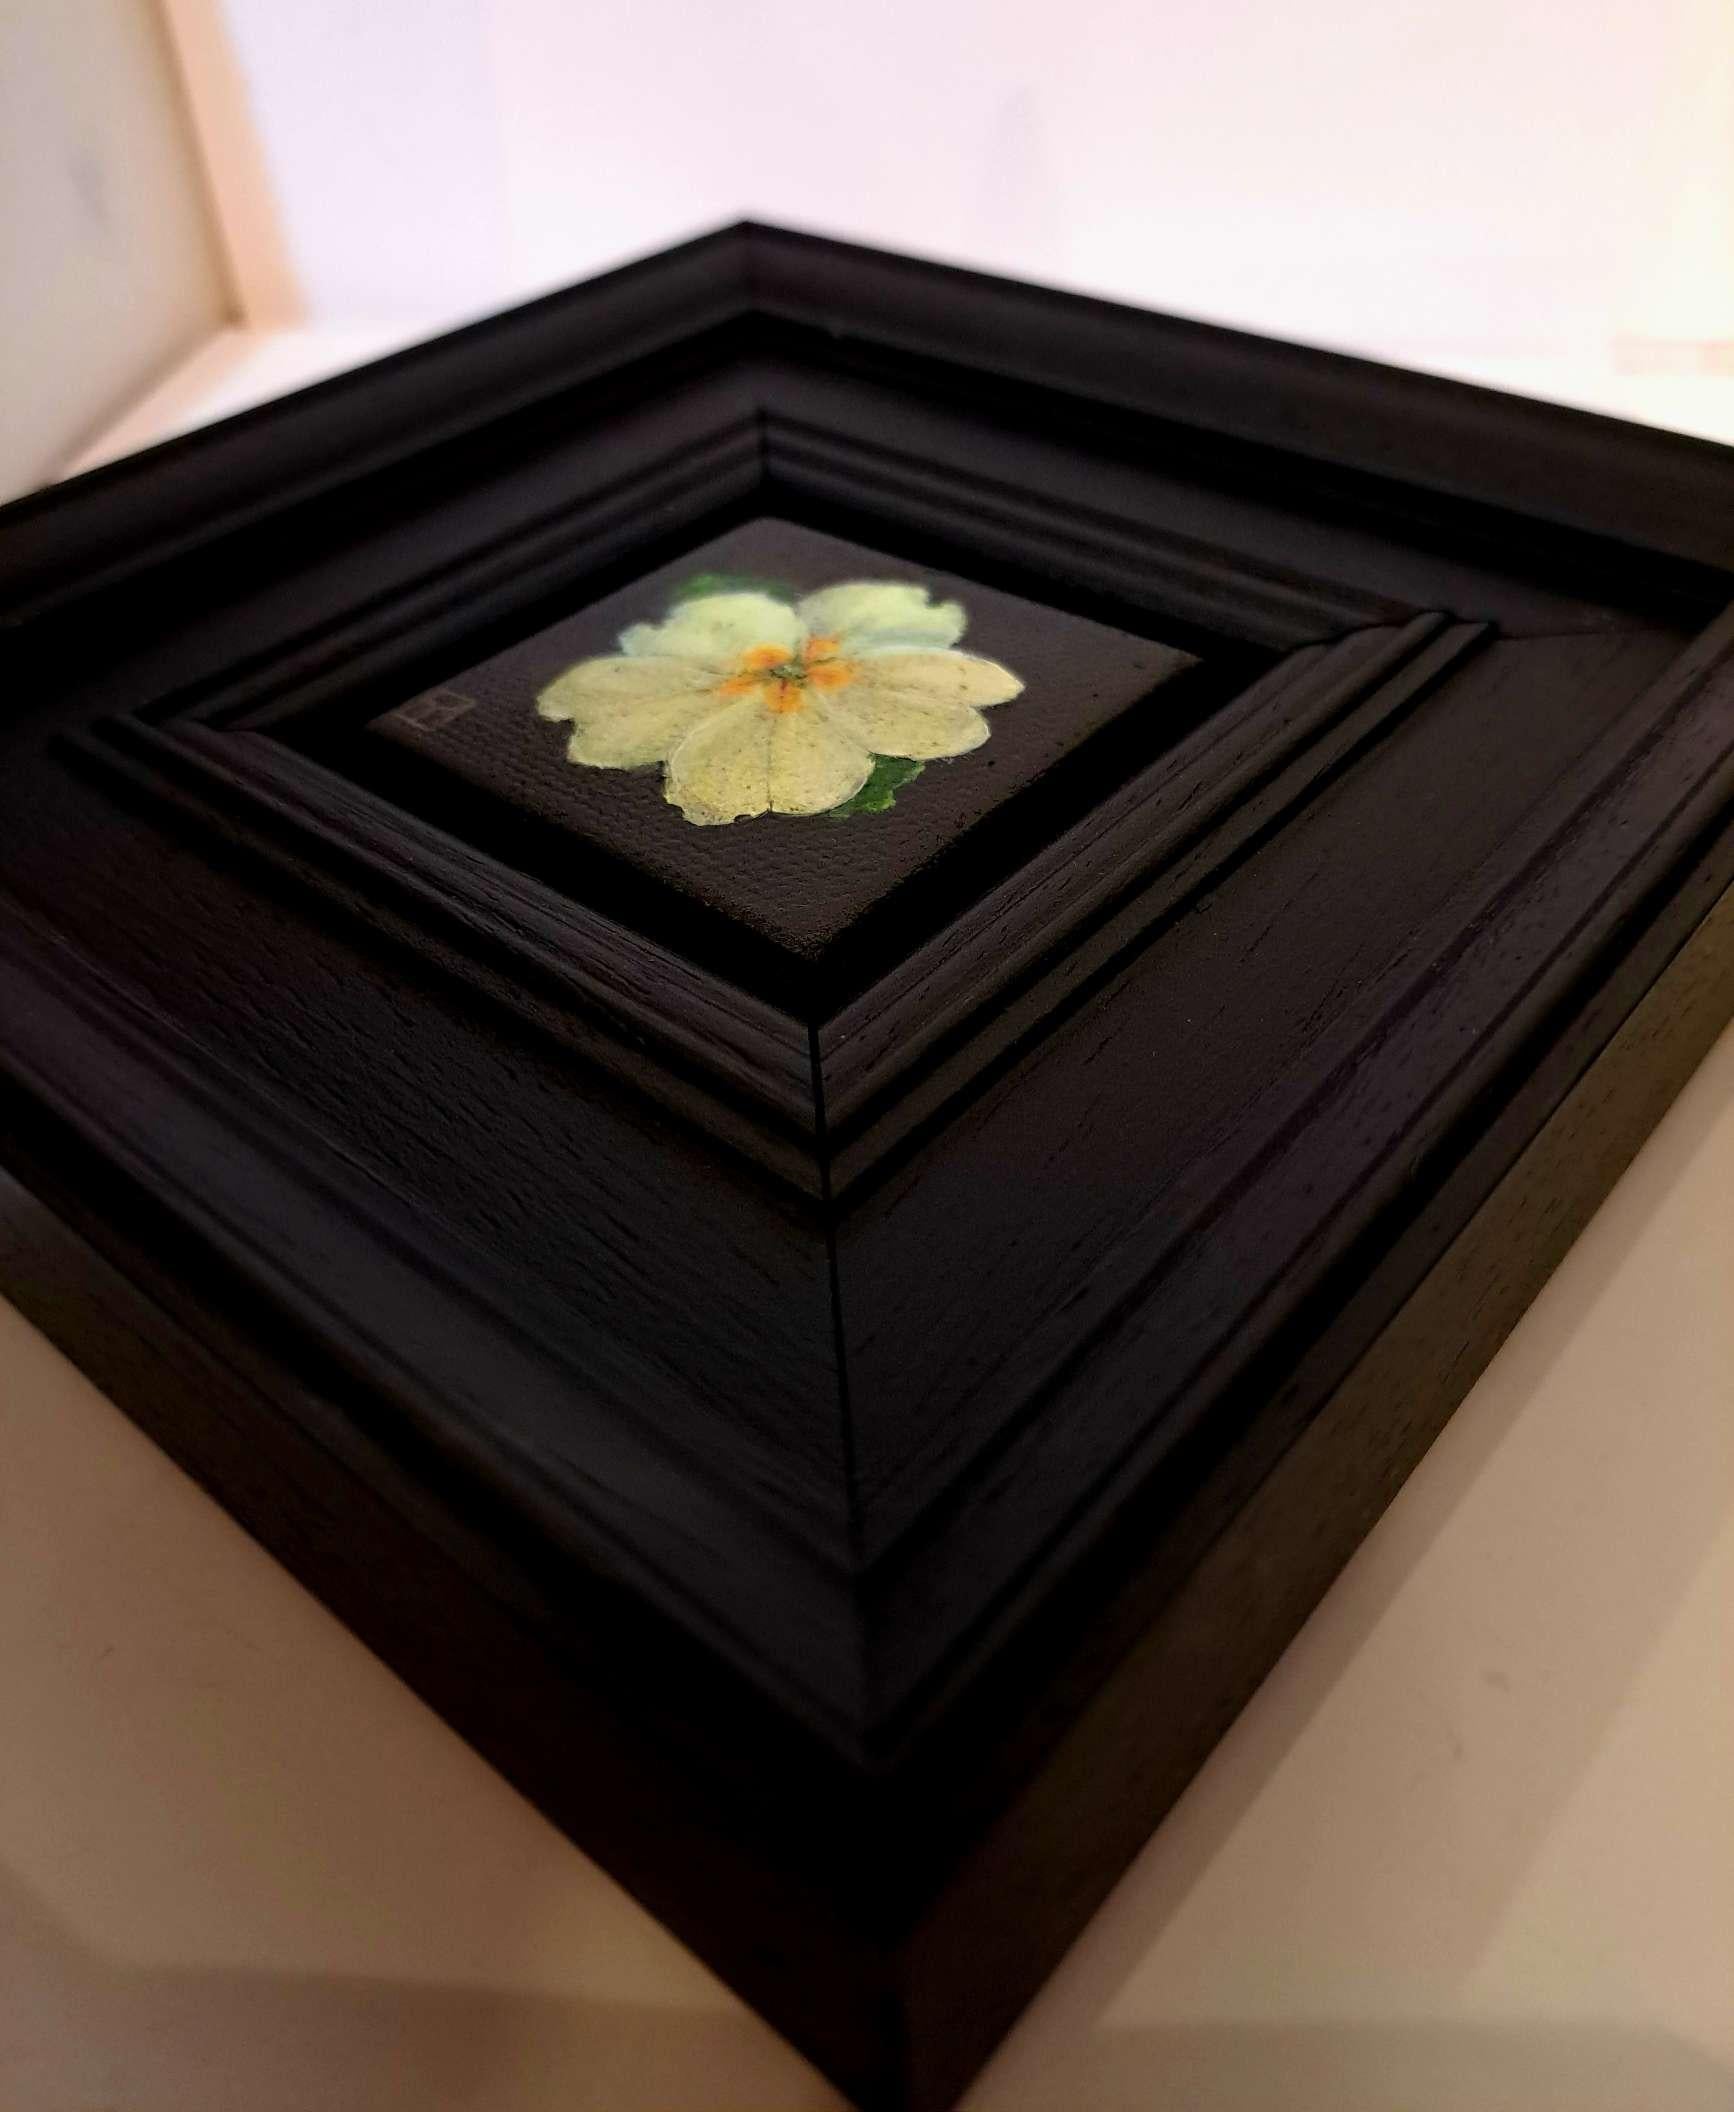 Spring Collection: Pocket Yellow Primrose is an original oil painting by Dani Humberstone as part of her Pocket Painting series featuring small scale realistic oil paintings, with a nod to baroque still life painting. The paintings are set in a